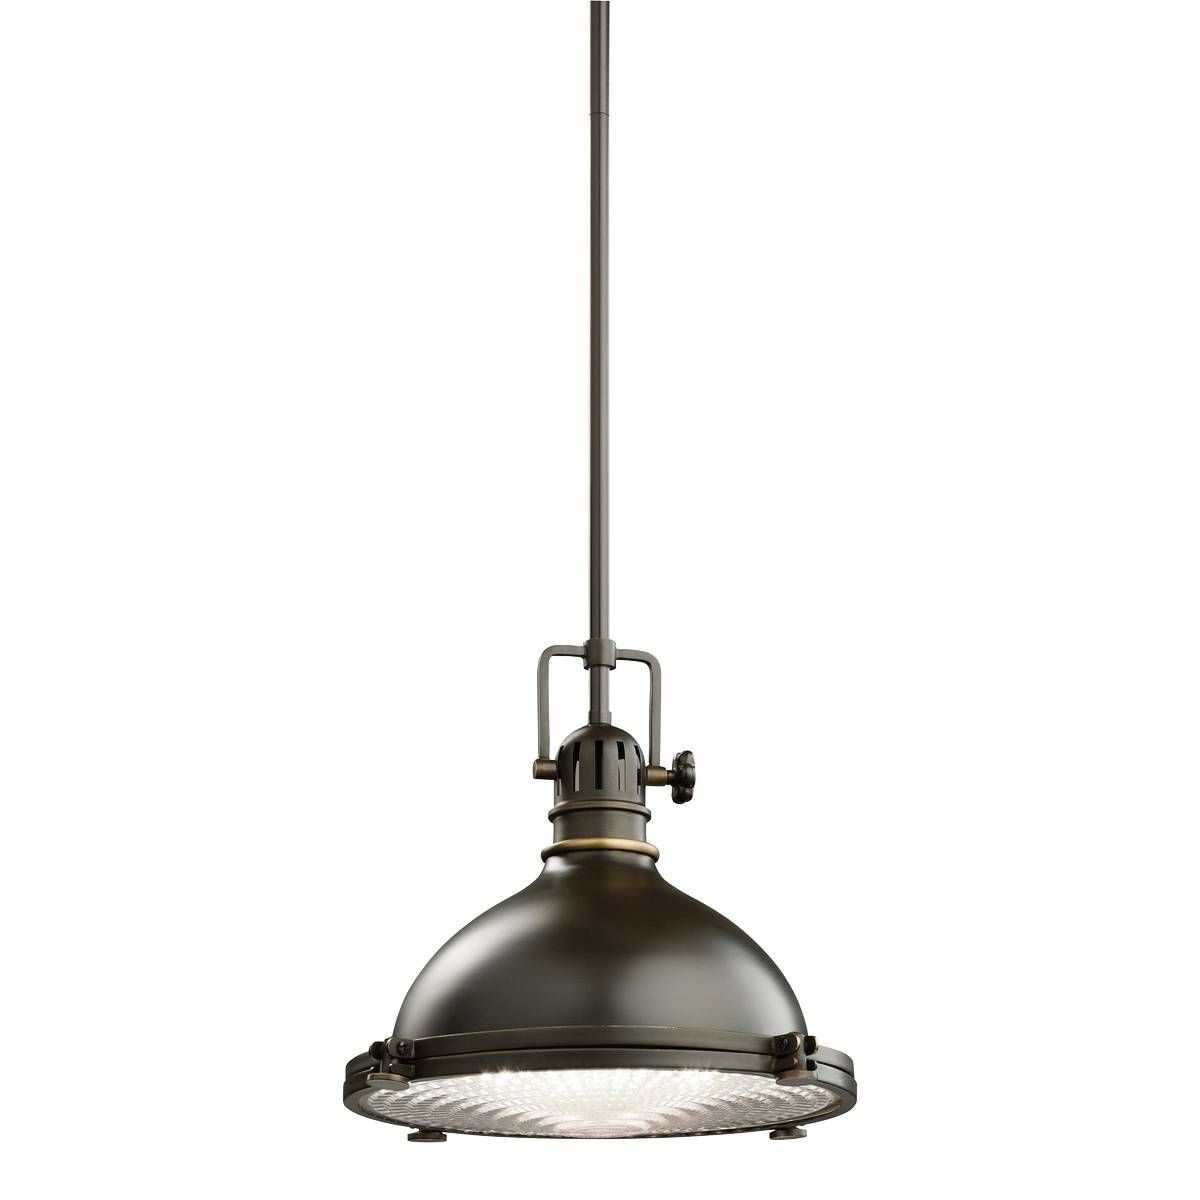 Perfect Industrial Ceiling Light Fixtures 27 For Barn Pendant For Barn Pendant Lights Fixtures (View 15 of 15)